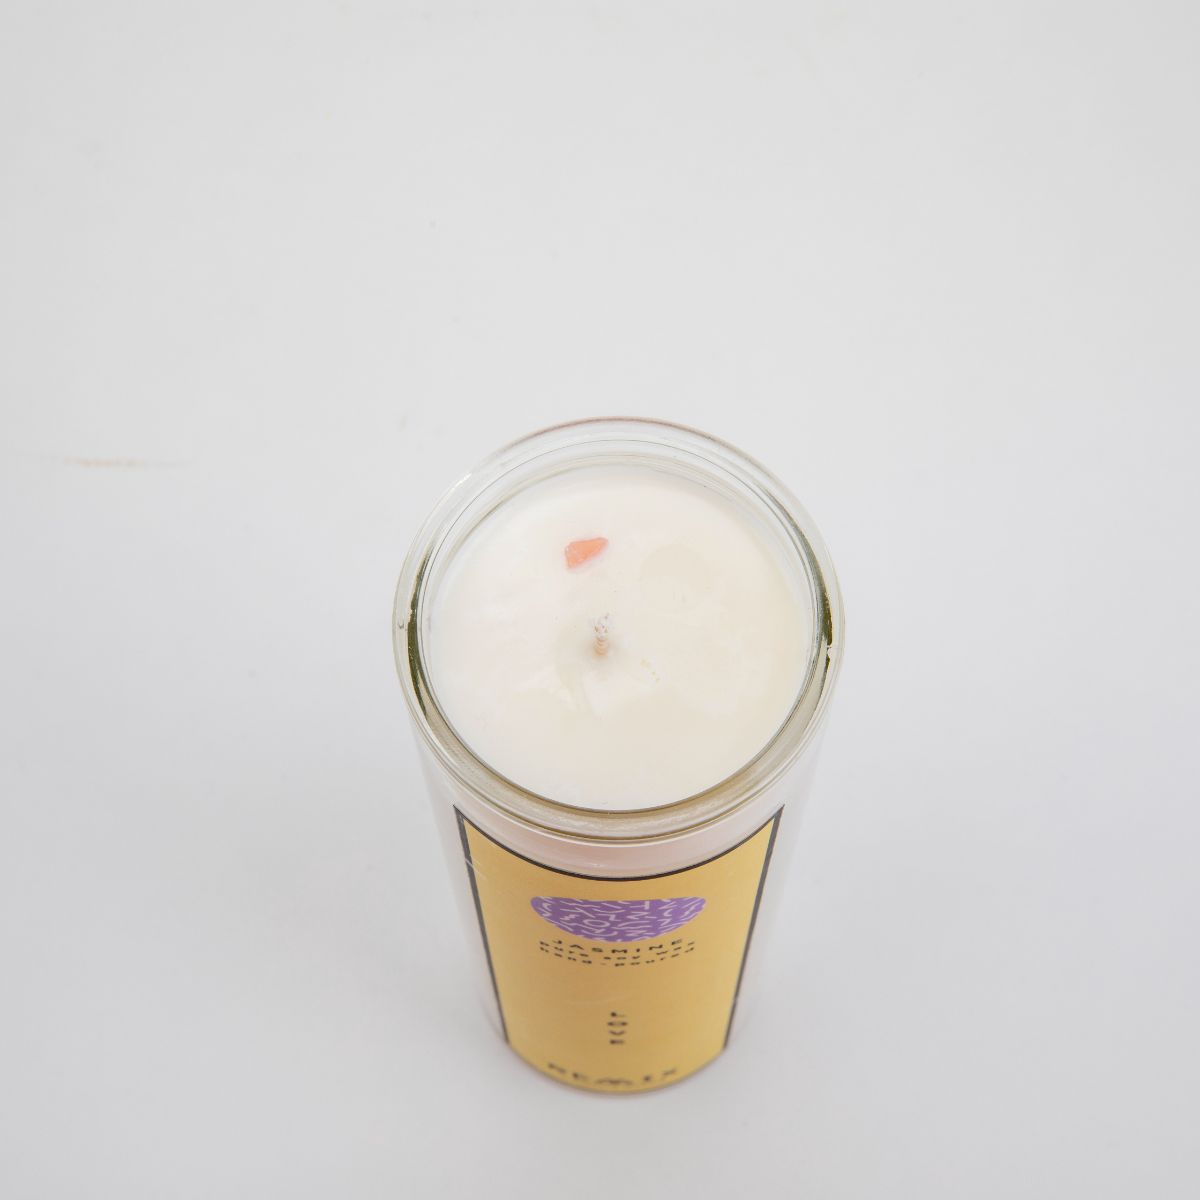 REMIX Soy Candle